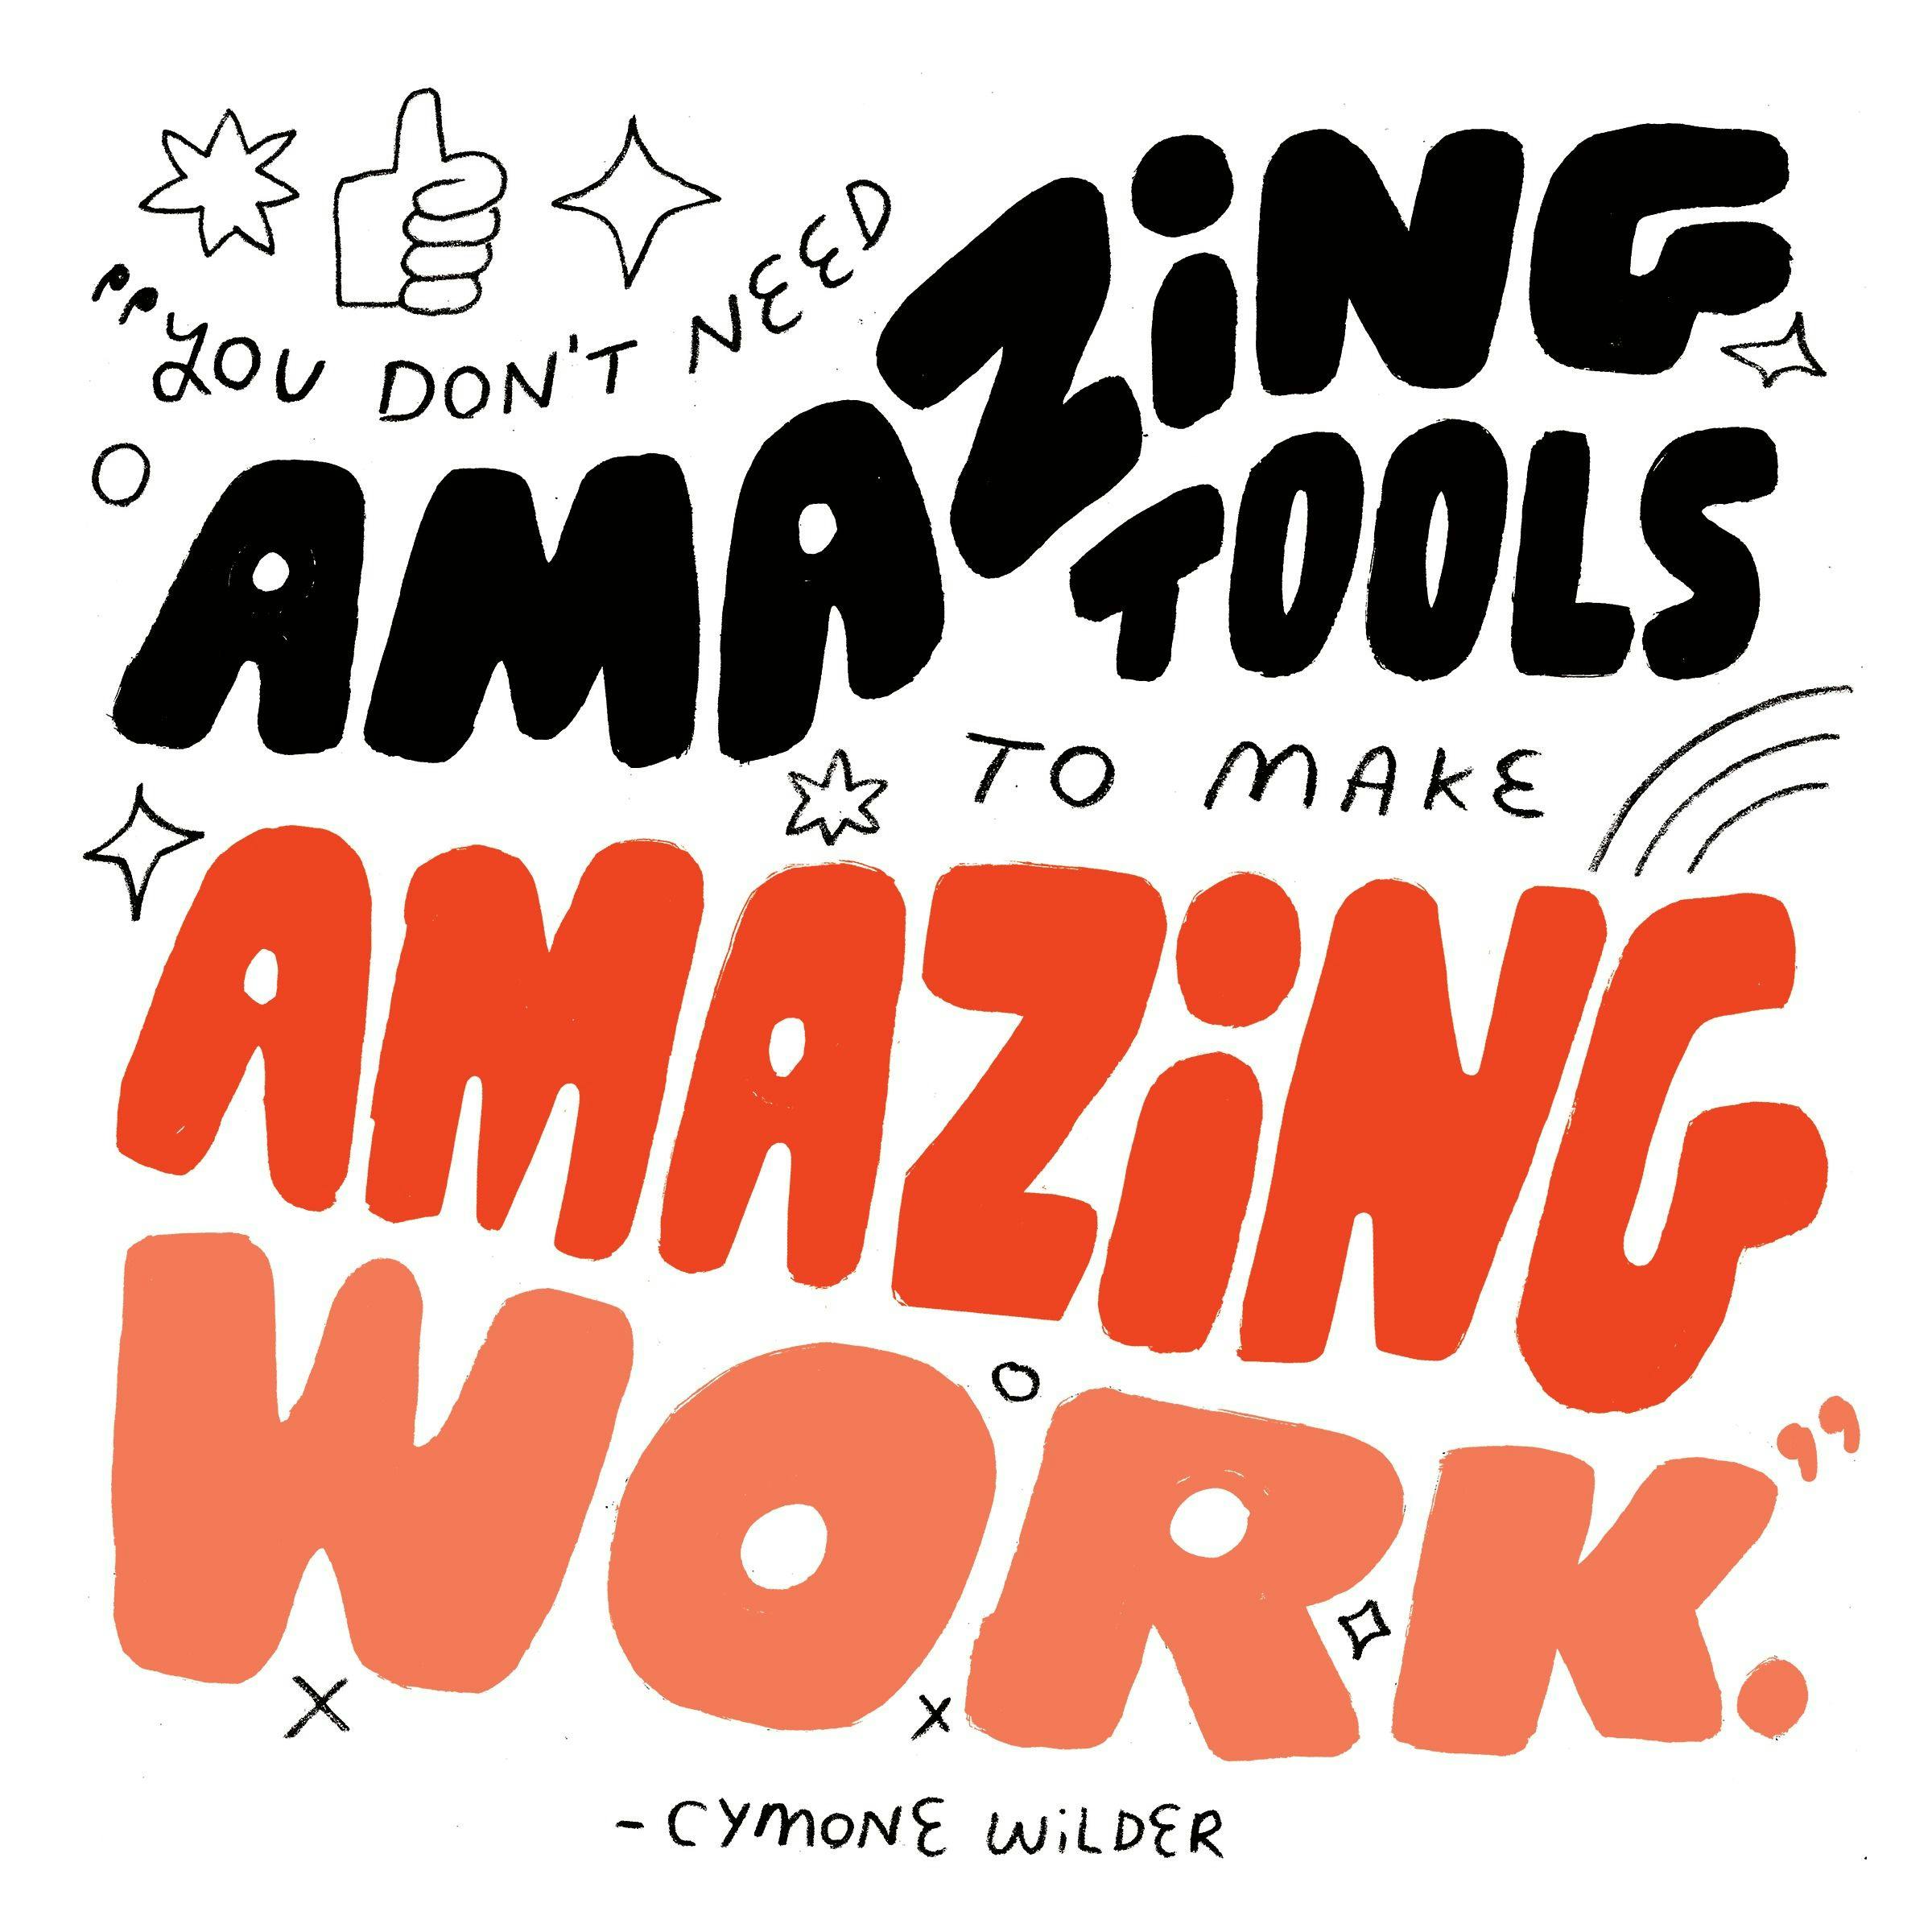 303 - Afraid Your Creativity is Stunted? Maybe The Answer Isn't In The Work with Cymone Wilder